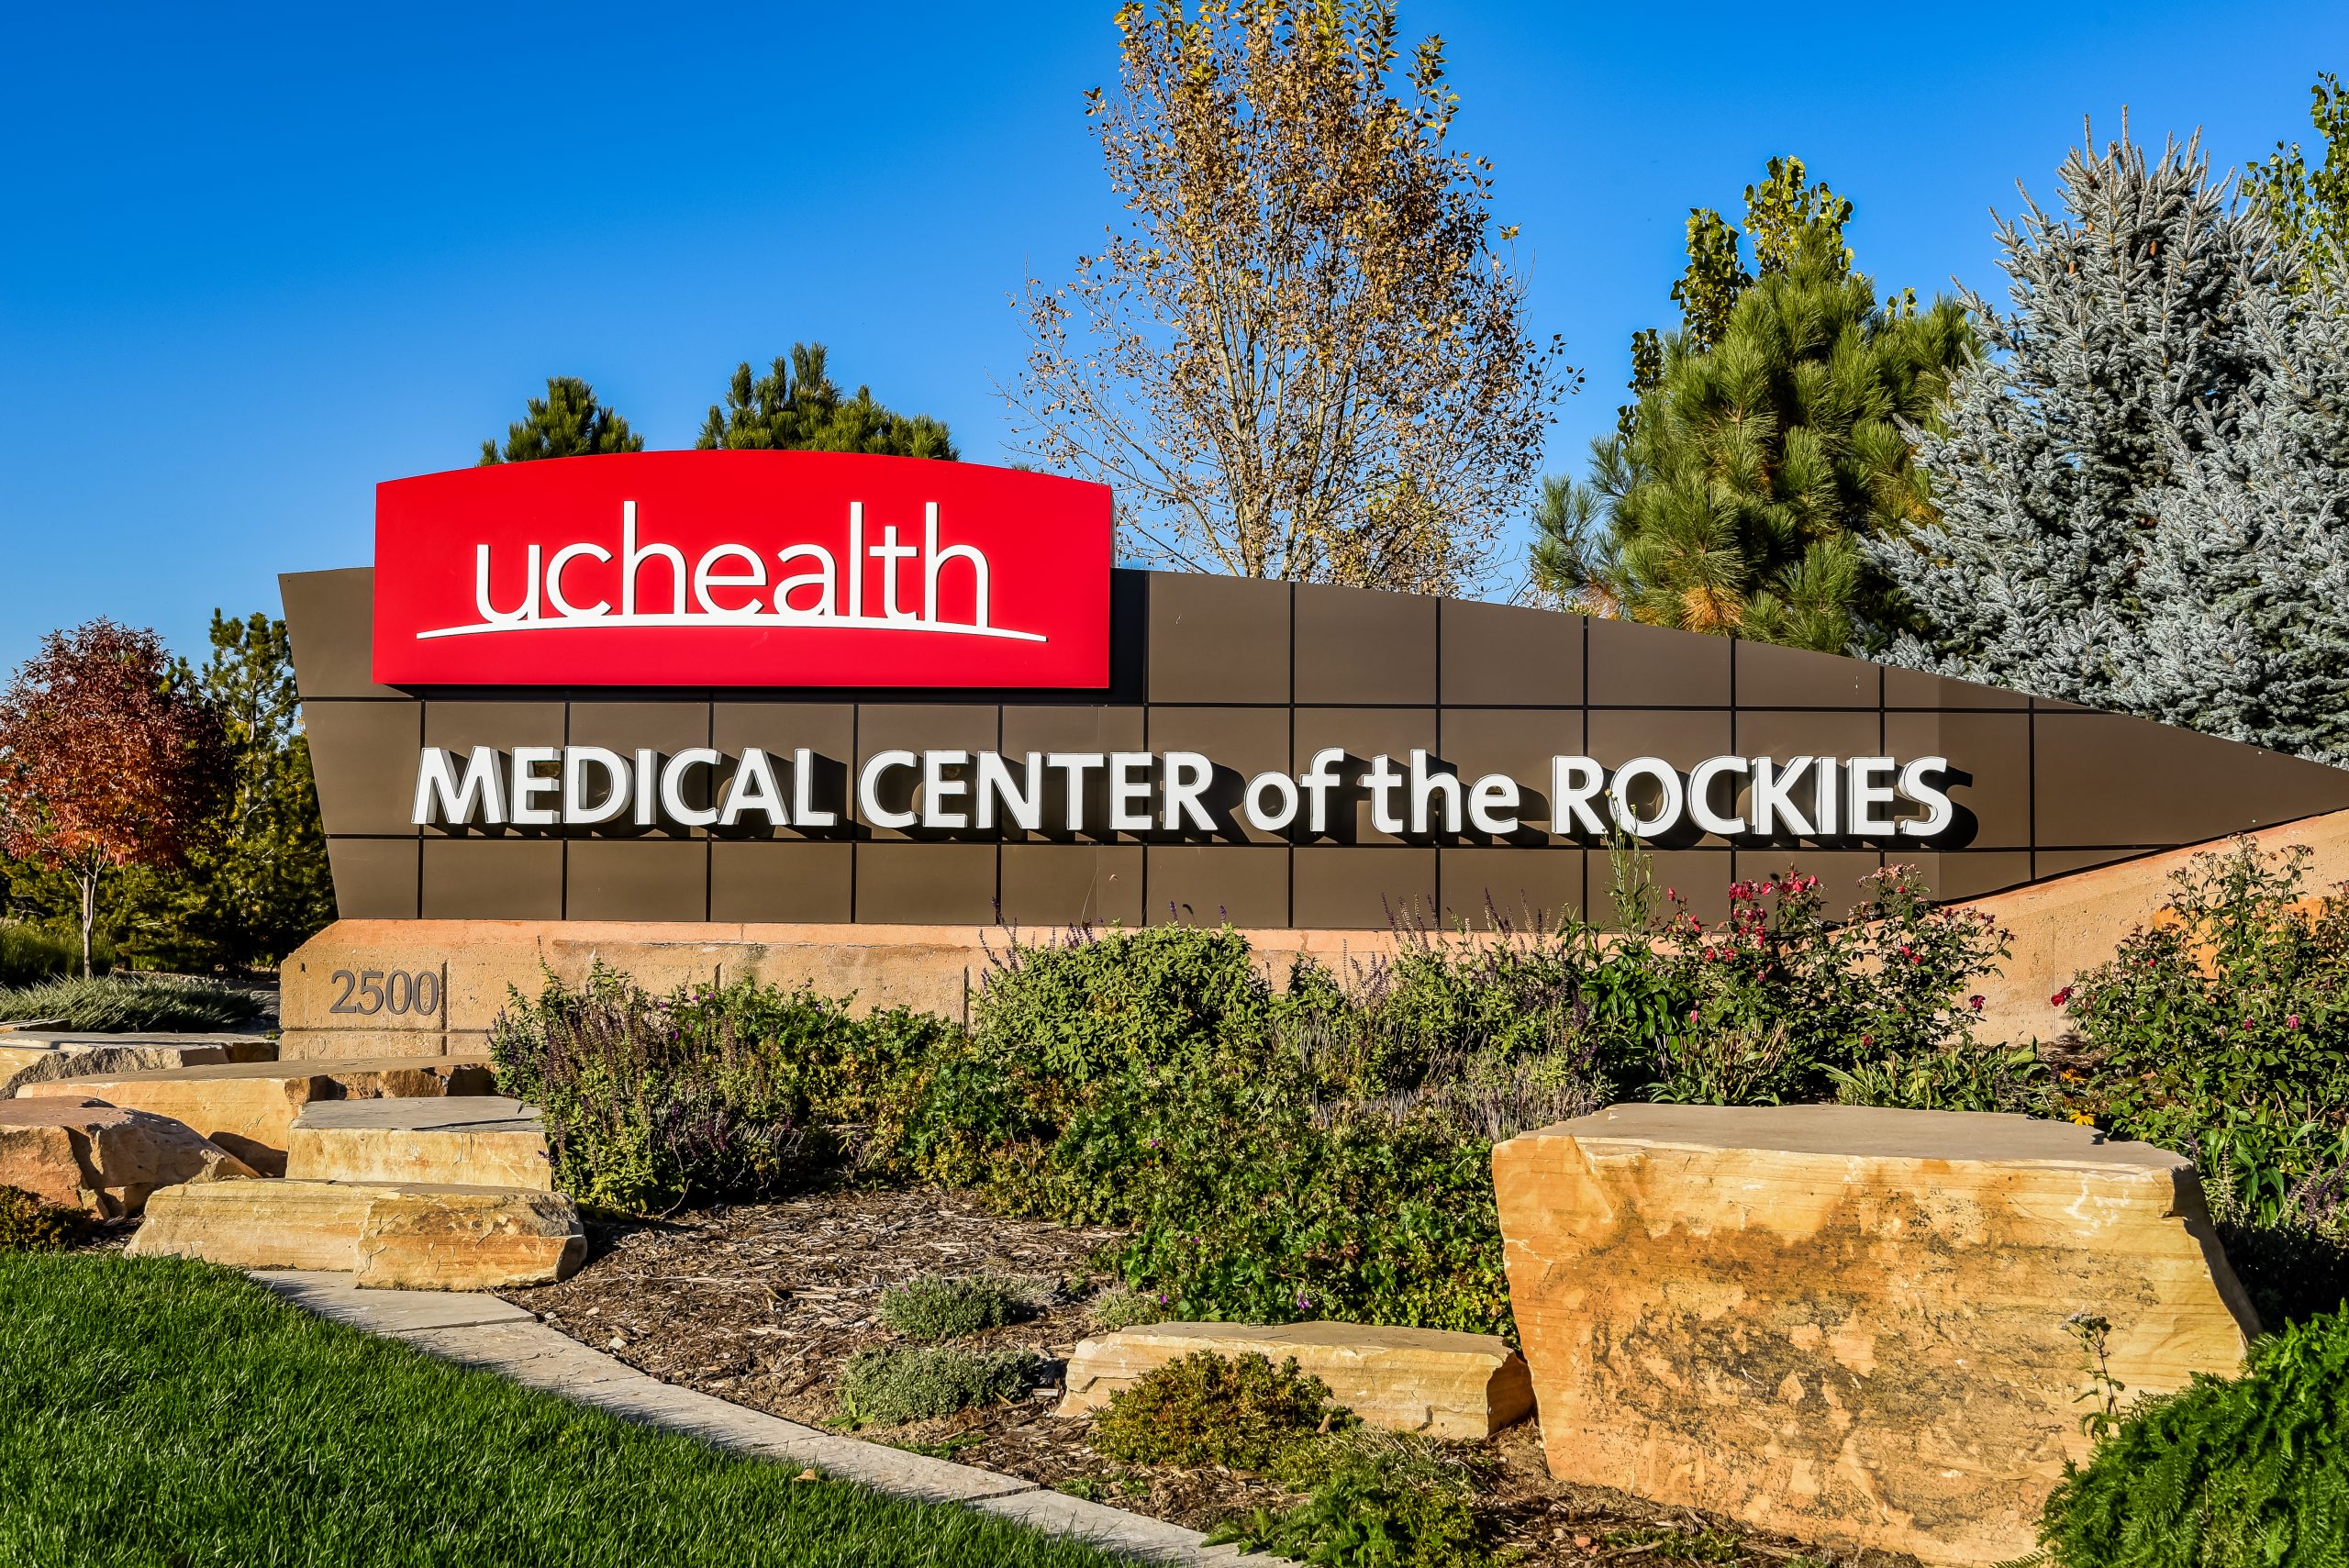 Medical Center of the Rockies sign